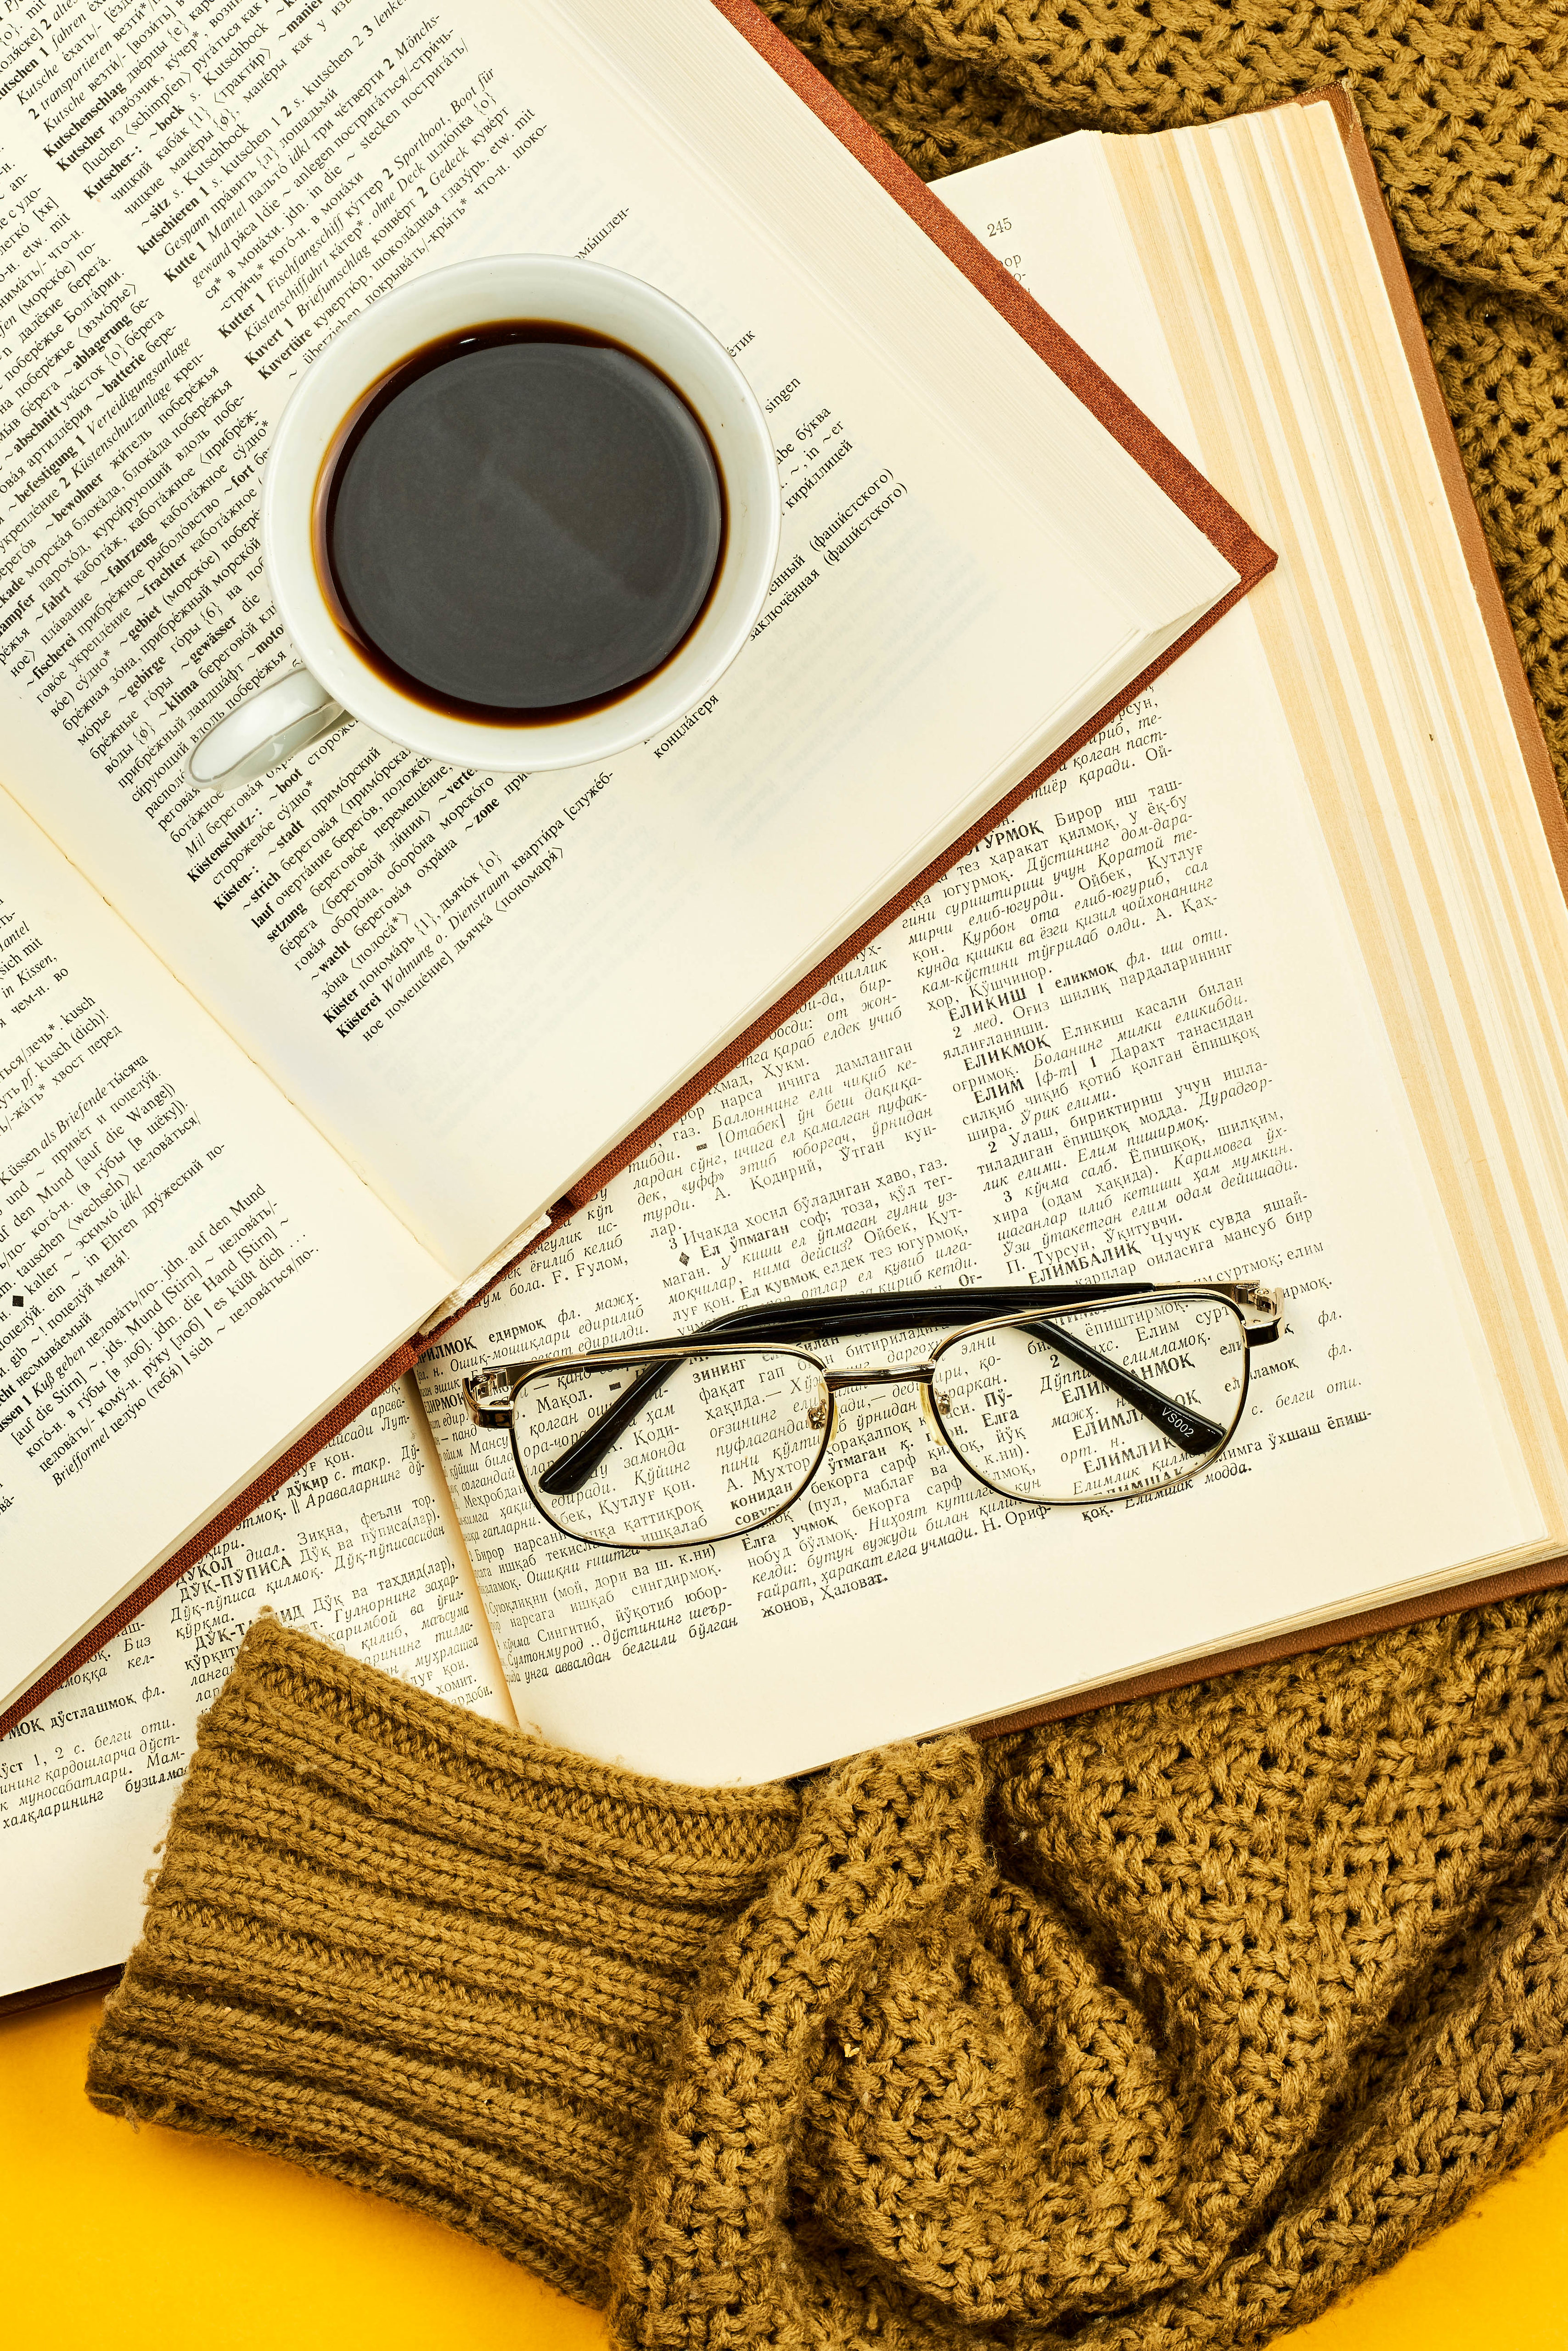 glasses, text, miscellanea, spectacles, coffee, miscellaneous, book, sweater